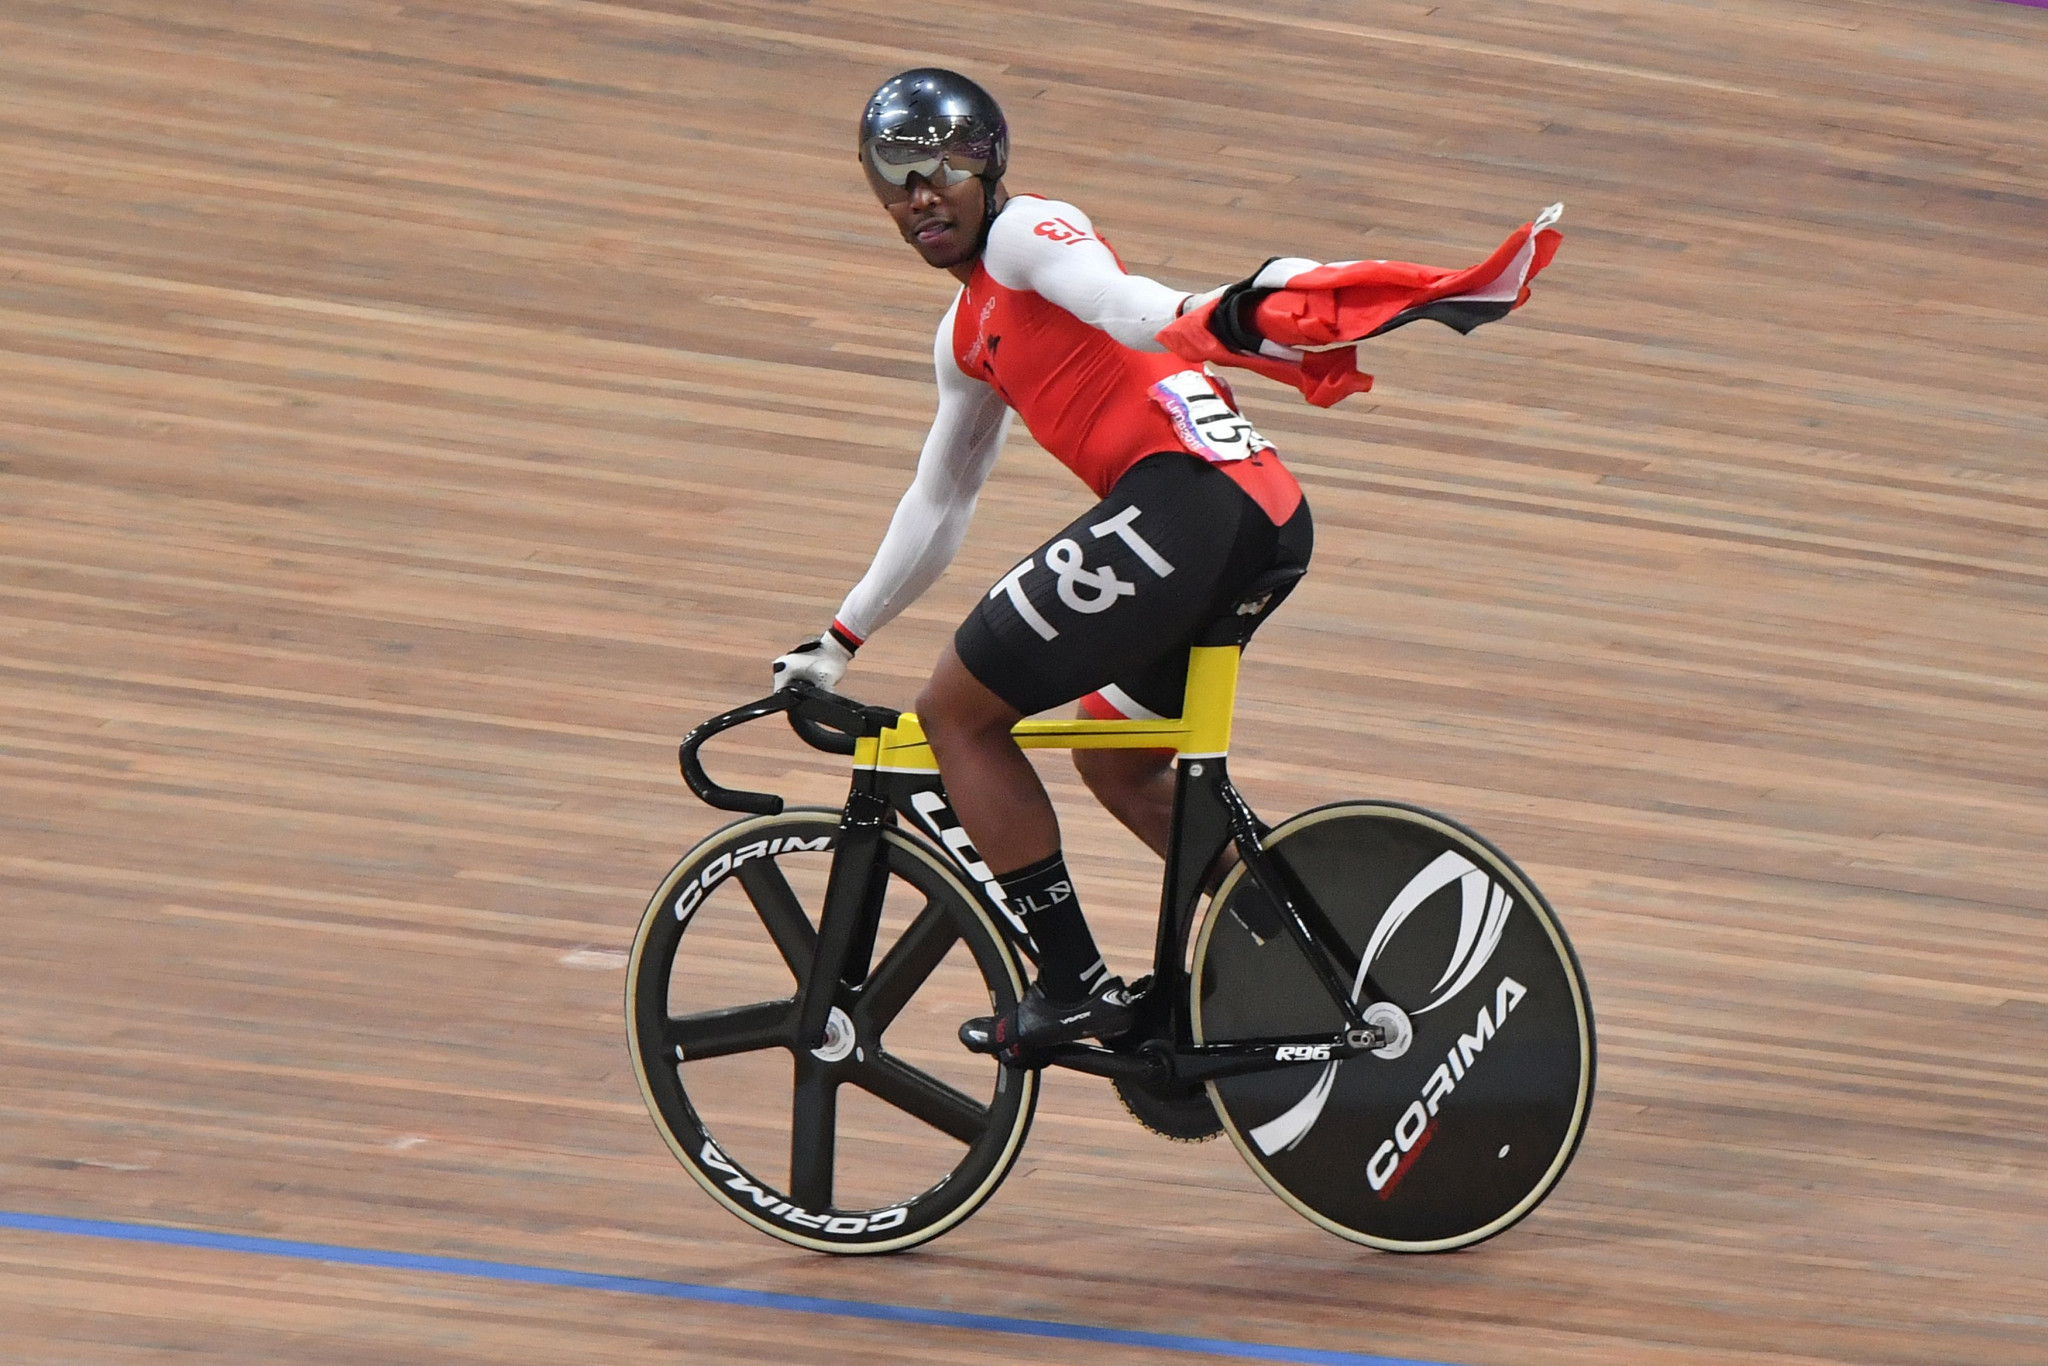 Nicholas Paul of Trinidad and Tobago won the men's track cycling sprint final at Lima 2019 ©Getty Images